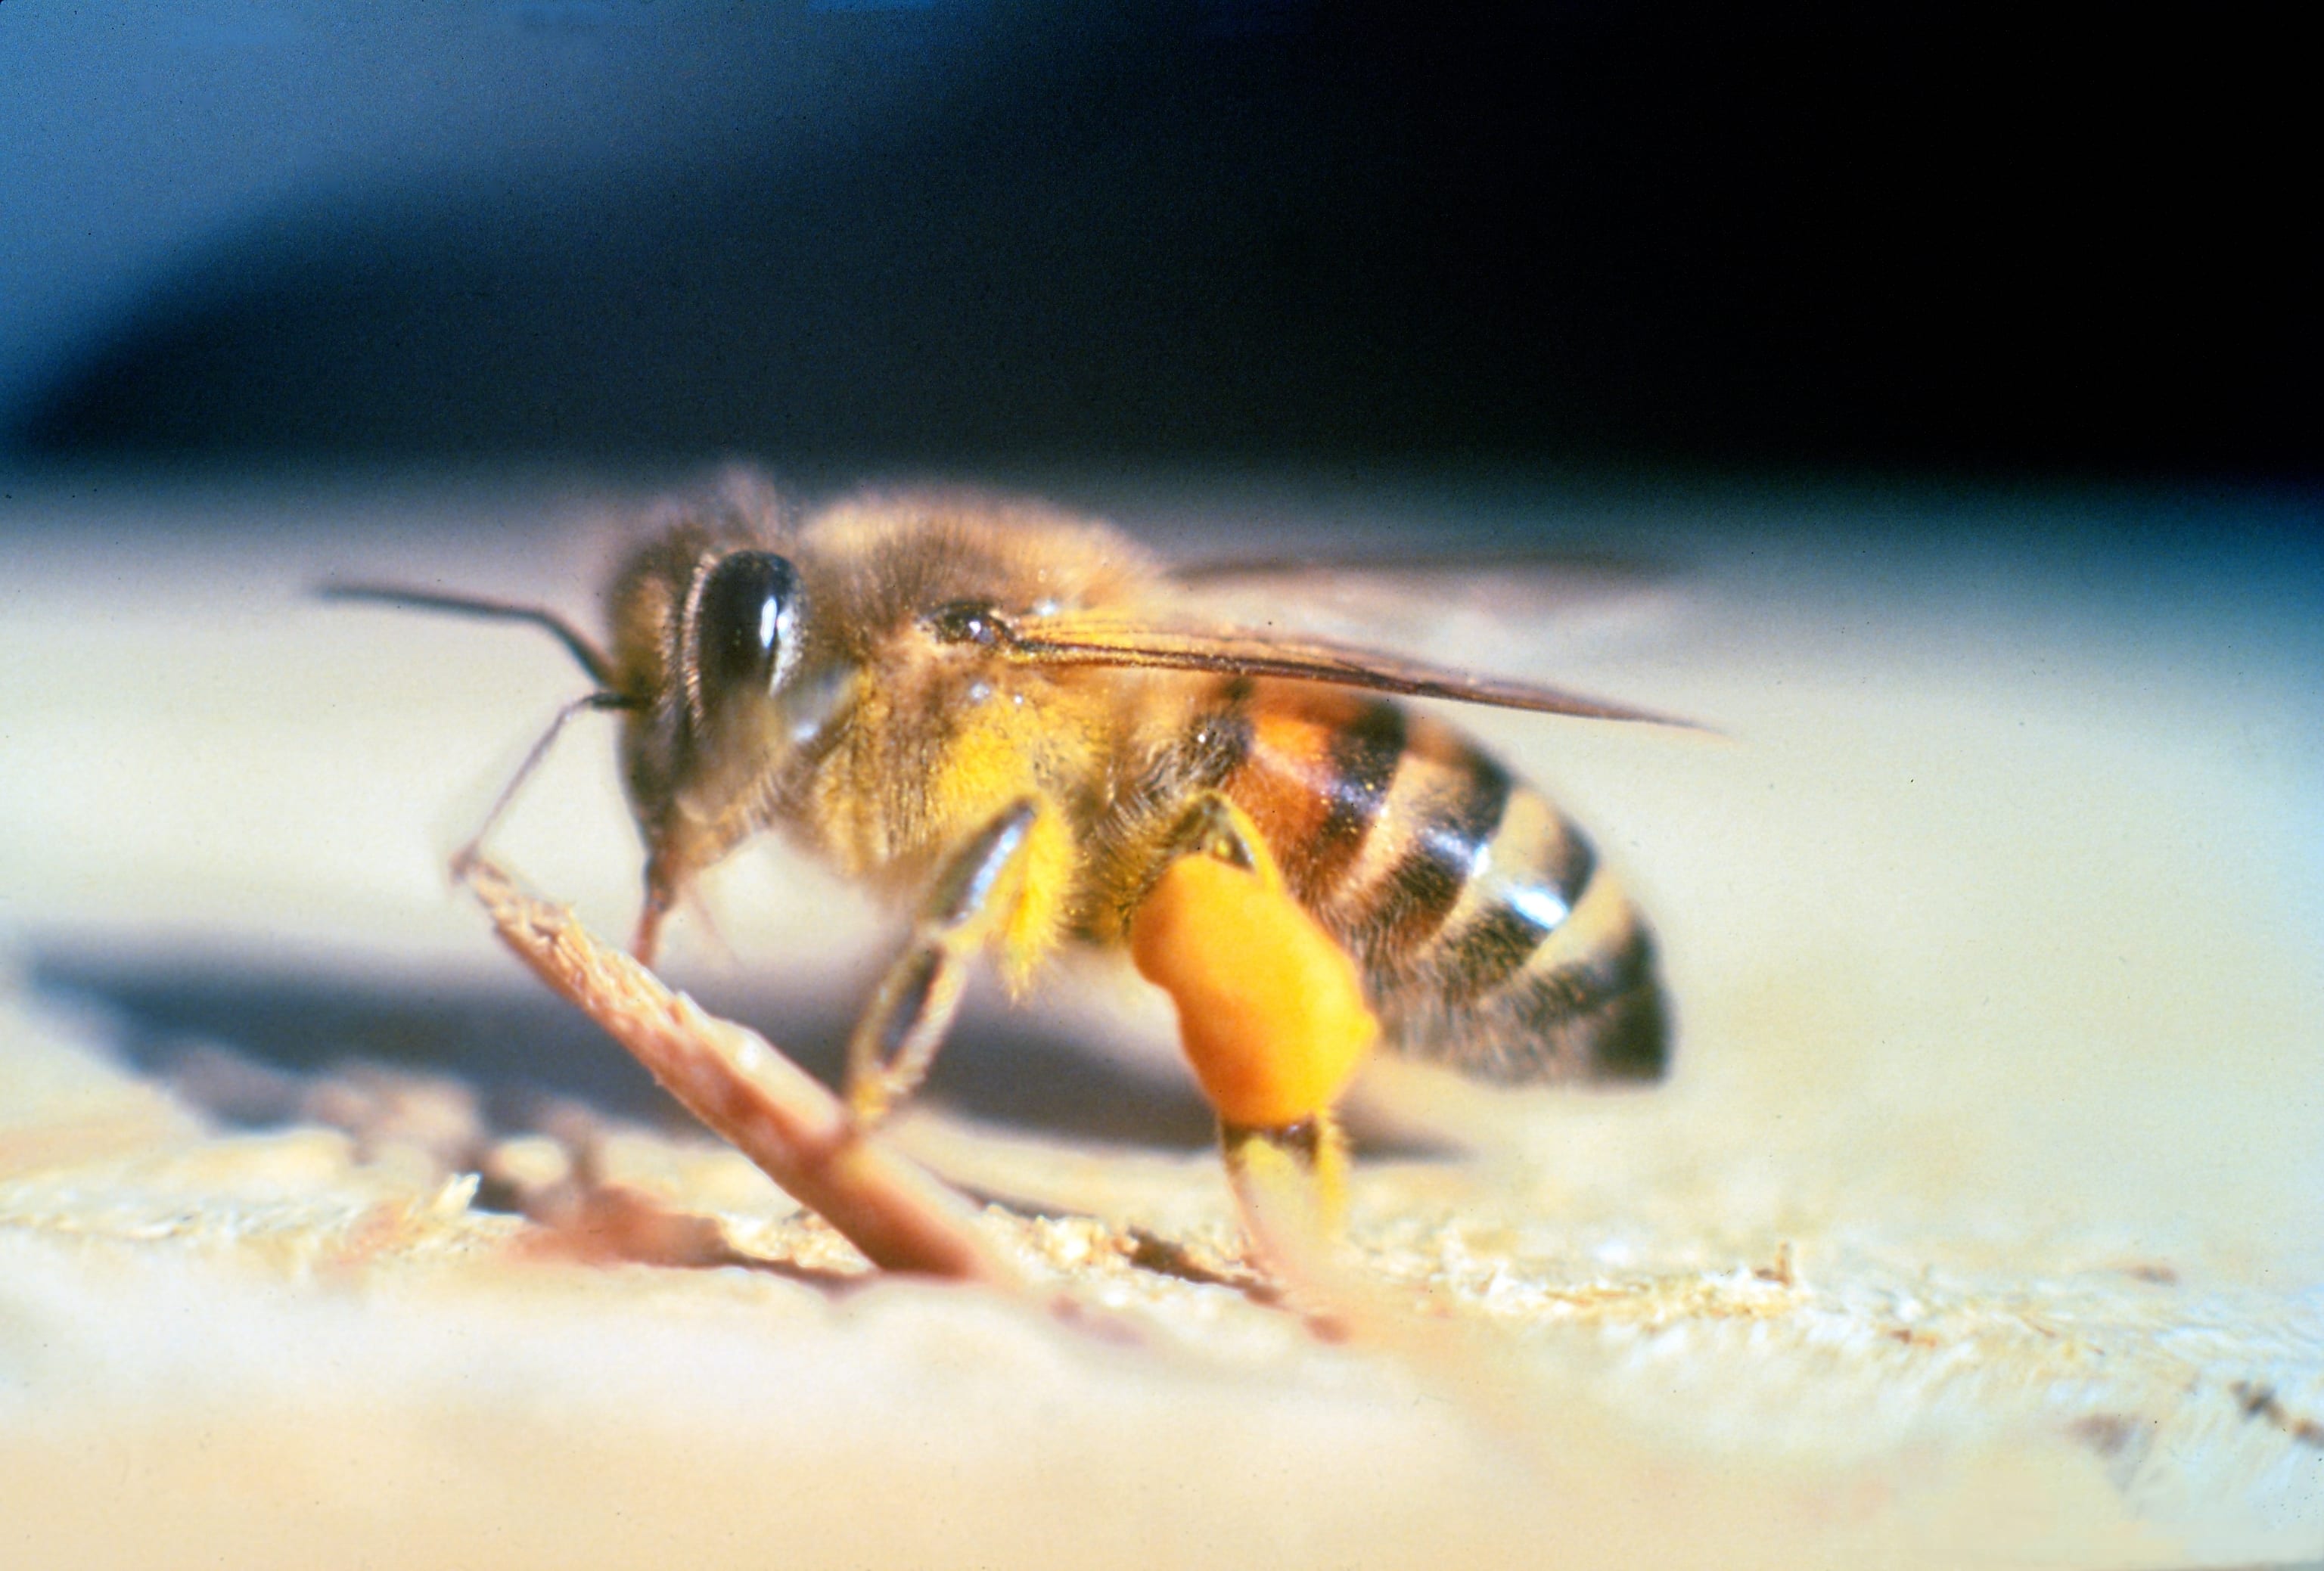 Adult Apis mellifera scutellata (African honey bee) in Florida. CREDIT: Jeffrey W. Lotz, Florida Department of Agriculture and Consumer Services, Bugwood.org.